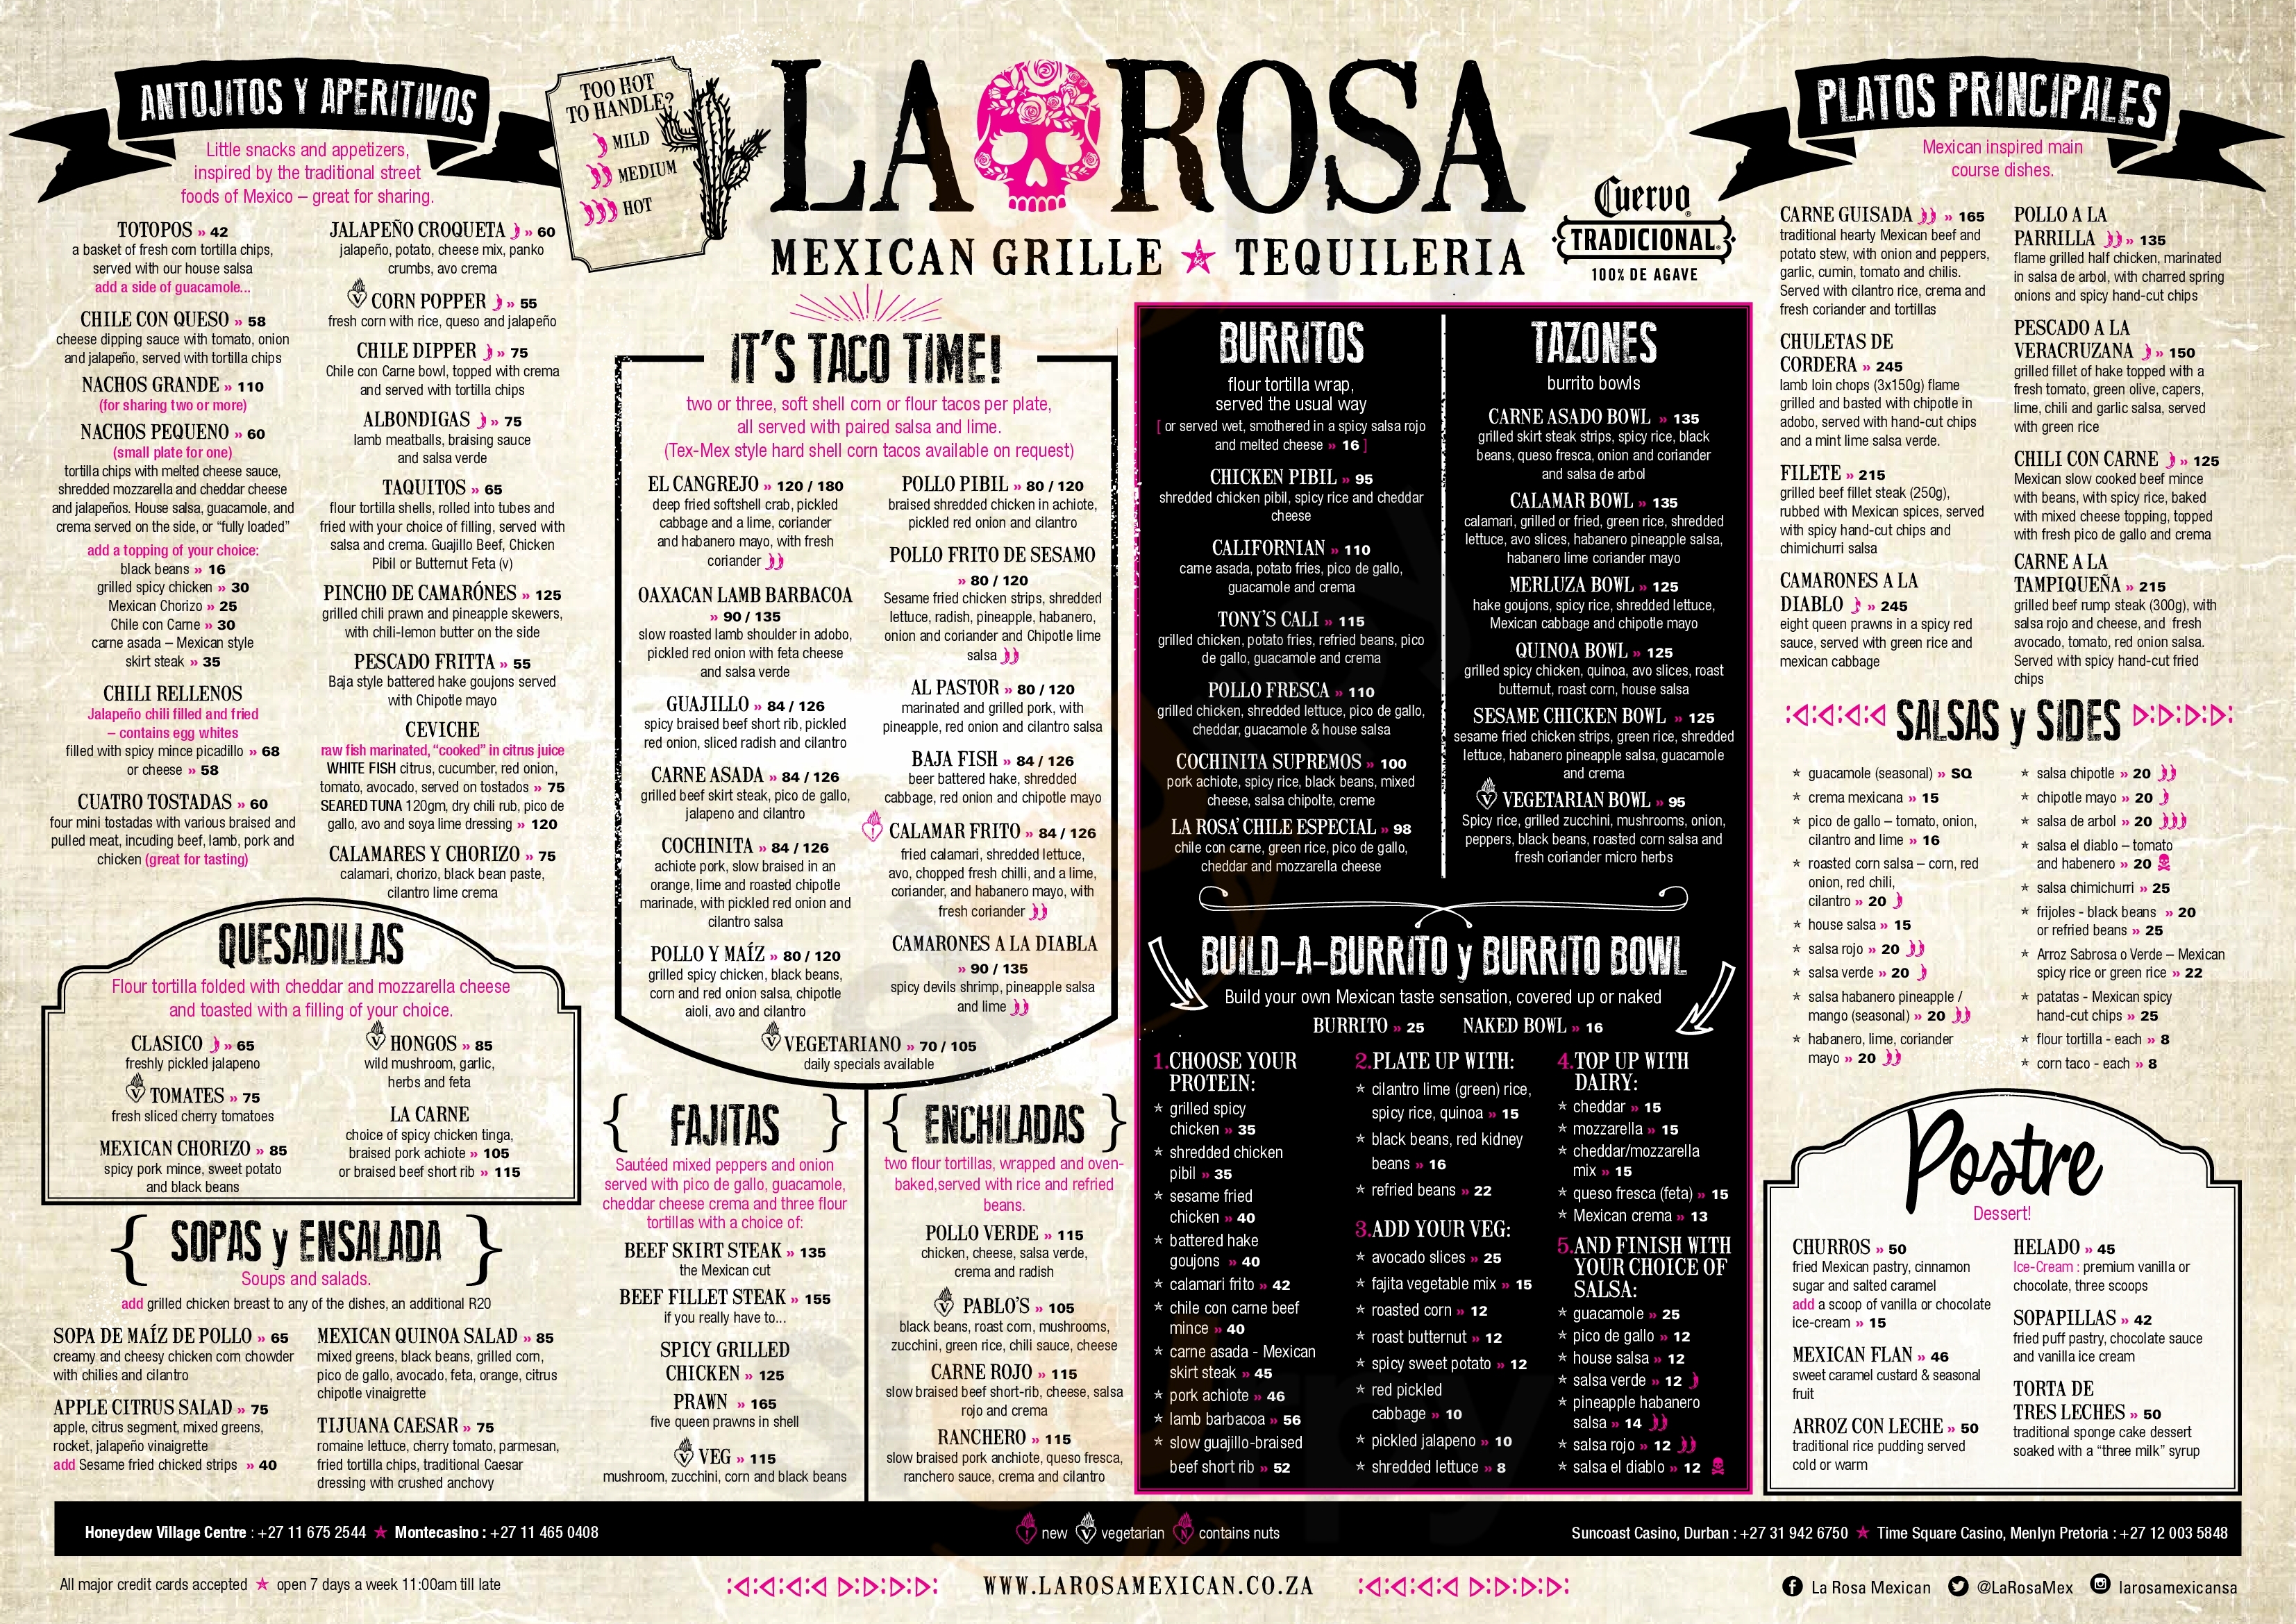 La Rosa Mexican Grille And Tequileria - Honeydew Roodepoort Menu - 1